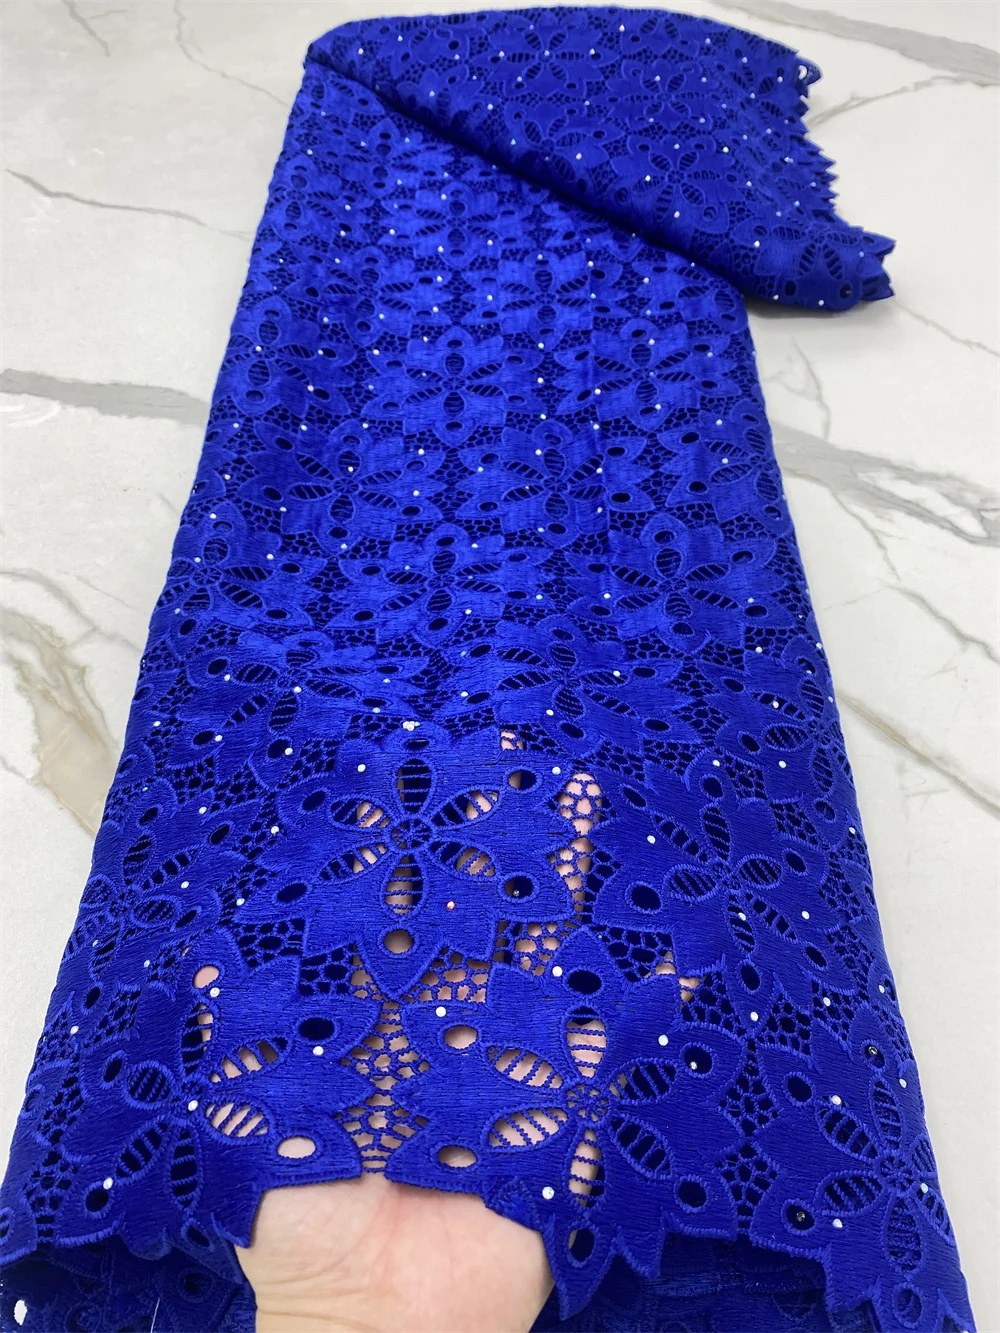 Lace Fabric African Lace Fabric 2021 High Quality Guipure Lace With Embroidery Nigerian Lace Fabrics For Woman Sewing 4582B